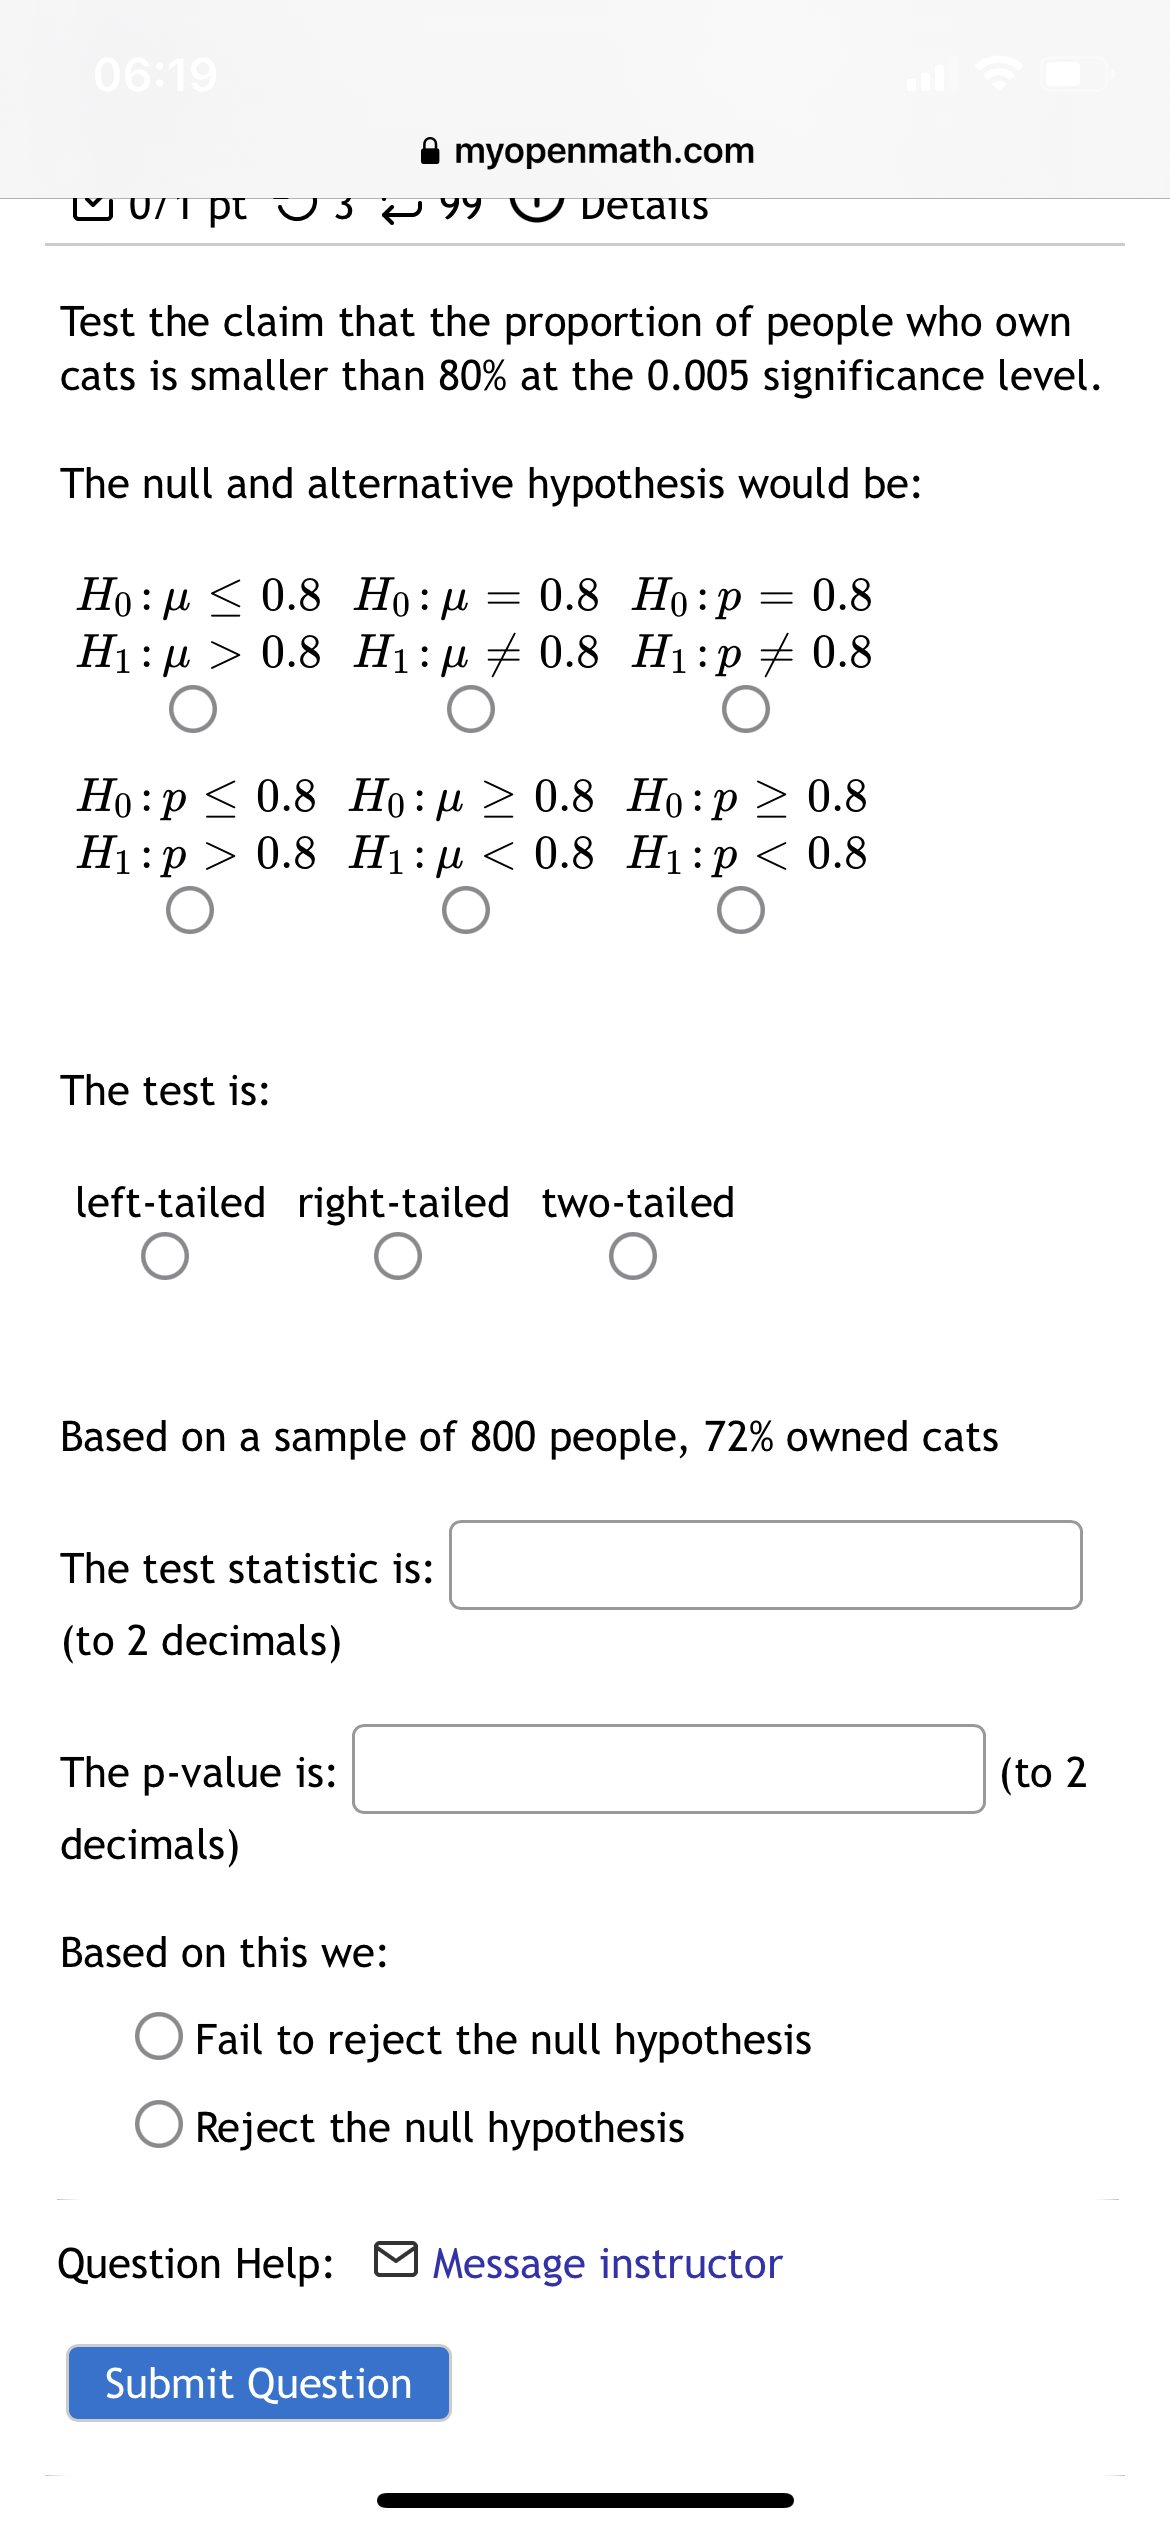 06:19
A myopenmath.com
pt
99 ☺ Details
Test the claim that the proportion of people who own
cats is smaller than 80% at the 0.005 significance level.
The null and alternative hypothesis would be:
Họ : µ < 0.8 Họ : µ = 0.8 Ho:p= 0.8
H1: µ > 0.8 H1: µ + 0.8 H1:p + 0.8
Ho :p < 0.8 Ho:µ > 0.8 Ho:p > 0.8
Ні:р > 0.8 Нi:и < 0.8 Н1:р < 0.8
The test is:
left-tailed right-tailed two-tailed
Based on a sample of 800 people, 72% owned cats
The test statistic is:
(to 2 decimals)
The p-value is:
(to 2
decimals)
Based on this we:
Fail to reject the null hypothesis
Reject the null hypothesis
Question Help: M Message instructor
Submit Question
